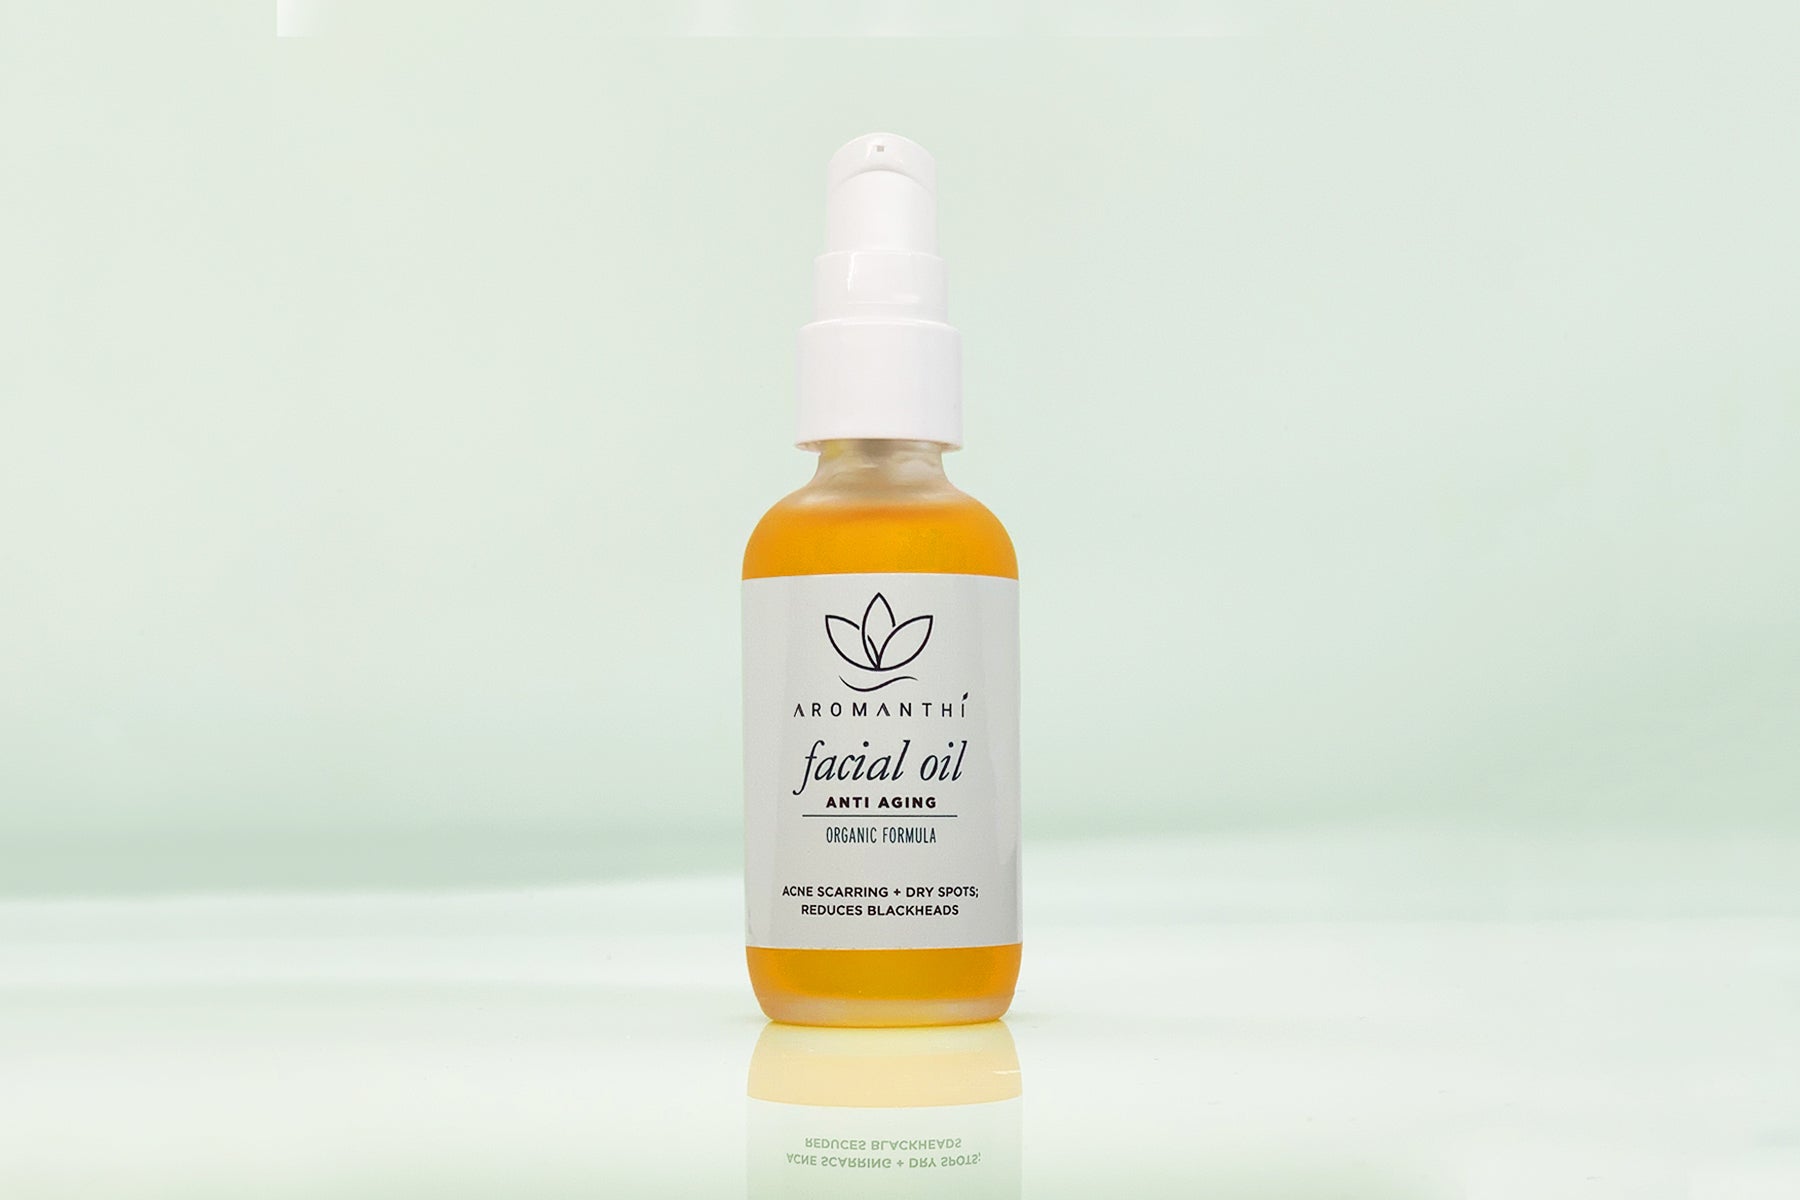 Healthy Skin-Care: Aromatherapy face oil, toner, wash and daytime moisturizer. Made with all natural ingredients, essential oils and plant based oils. Click here to view Aromanthi skincare products.